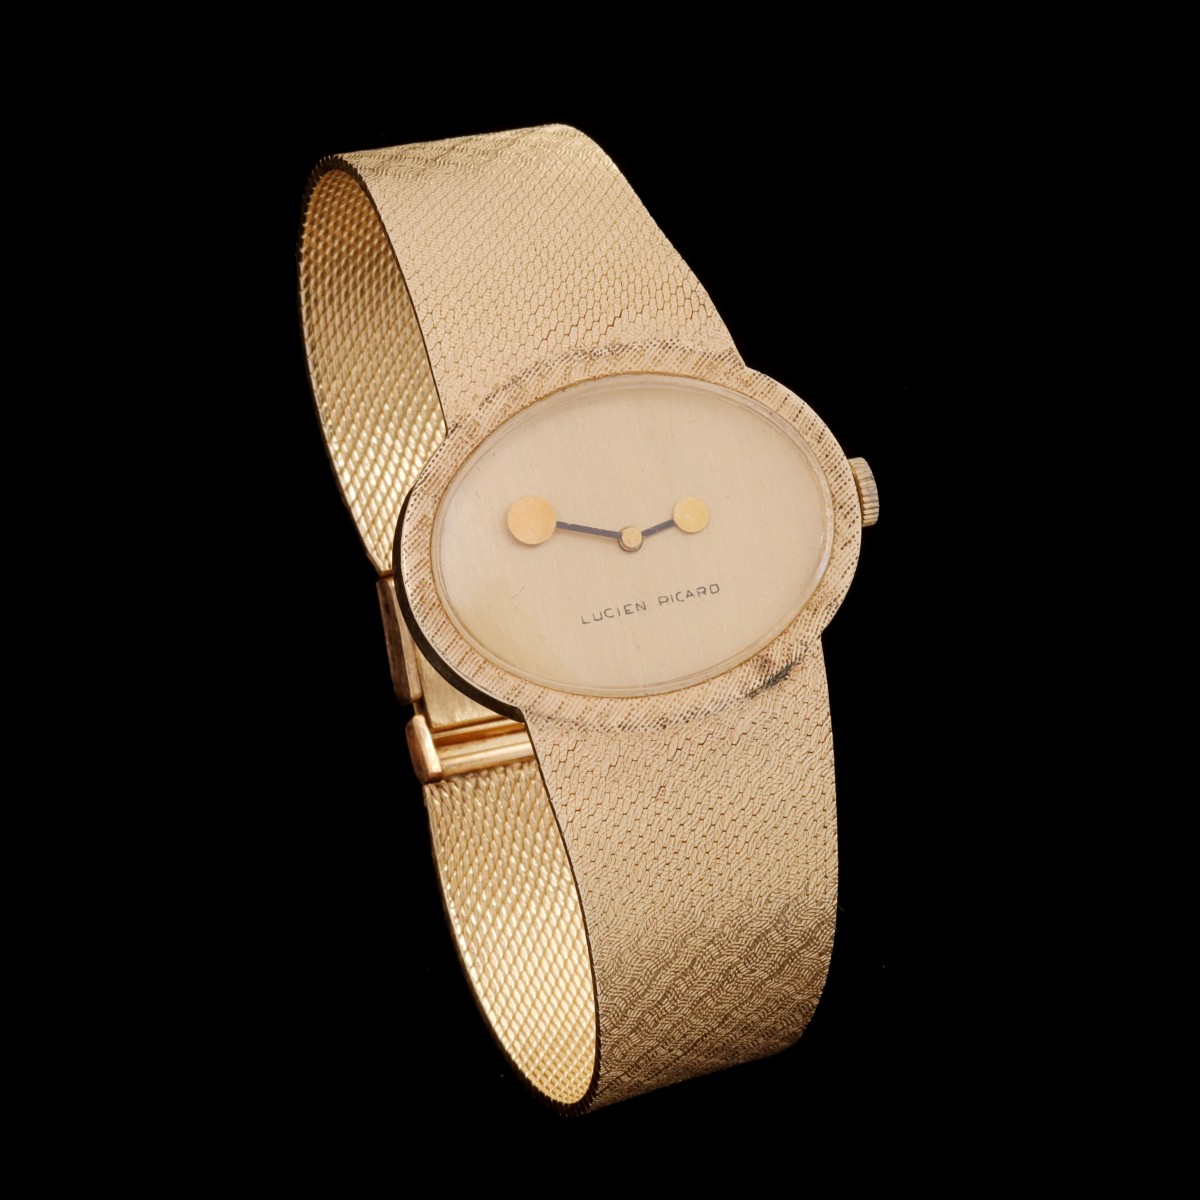 A MODERNIST LADIES WATCH SIGNED LUCIEN 'PICARD'